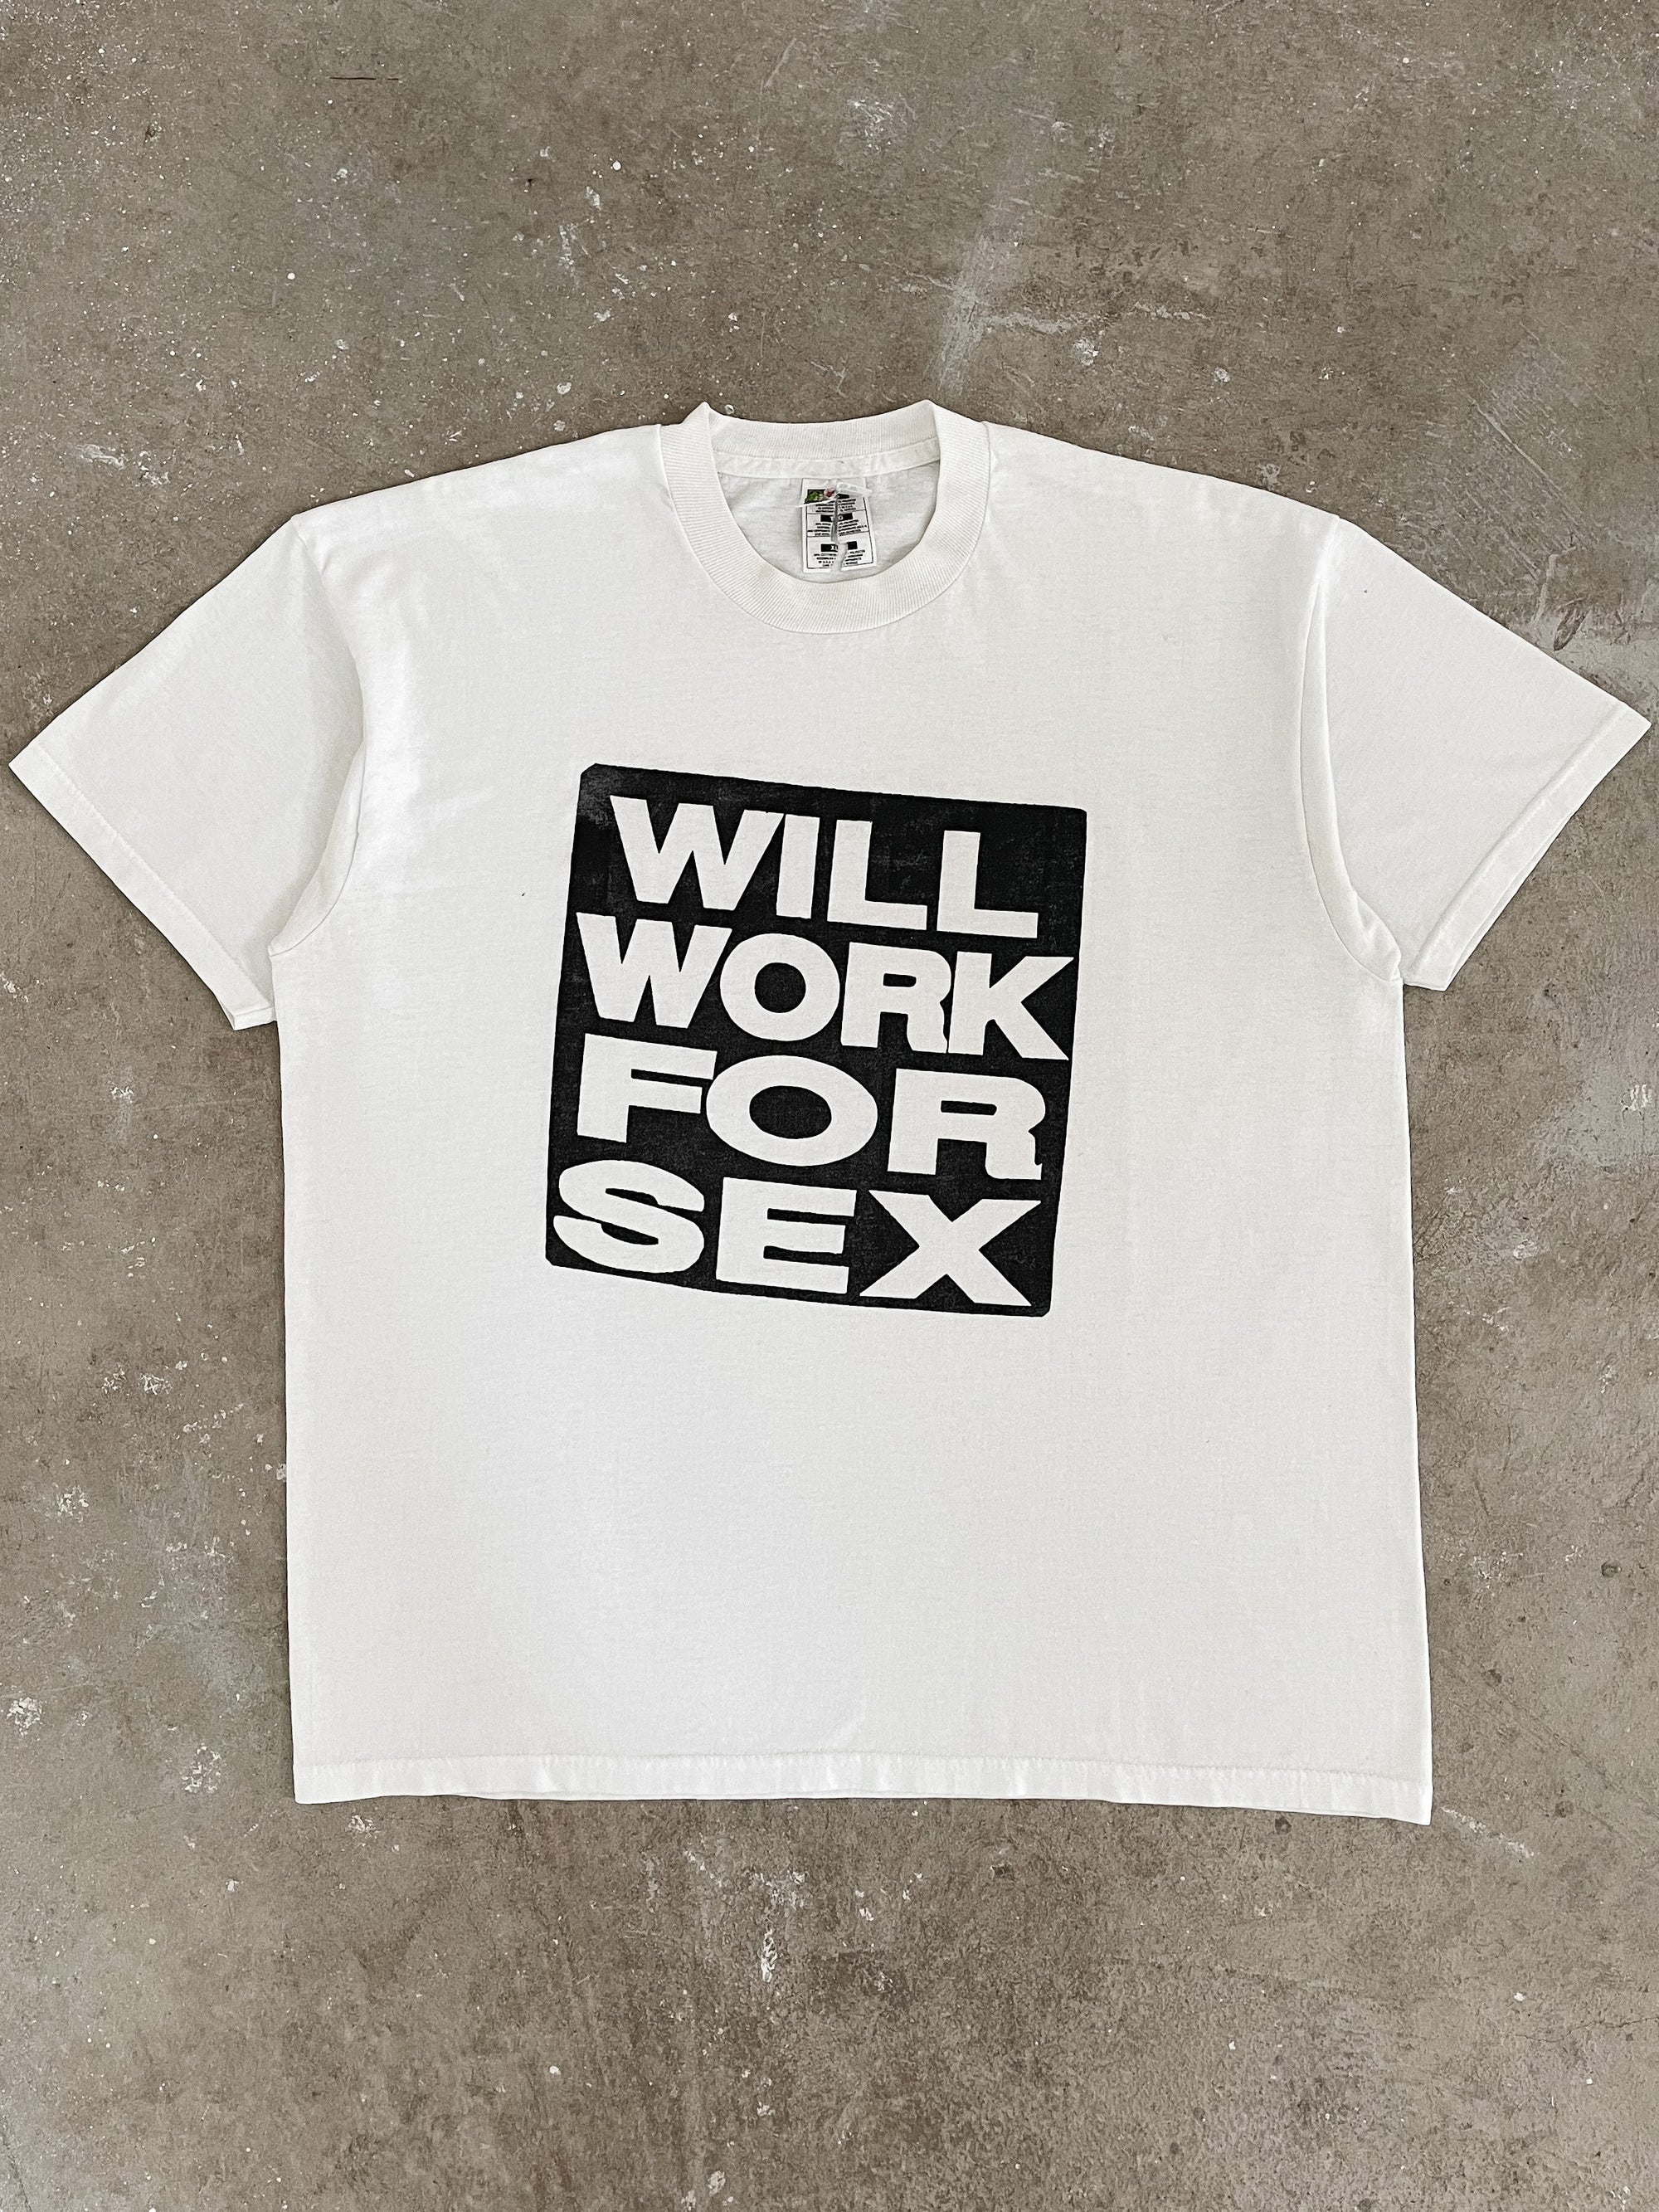 1990s “Will Work For Sex” Tee (XL)